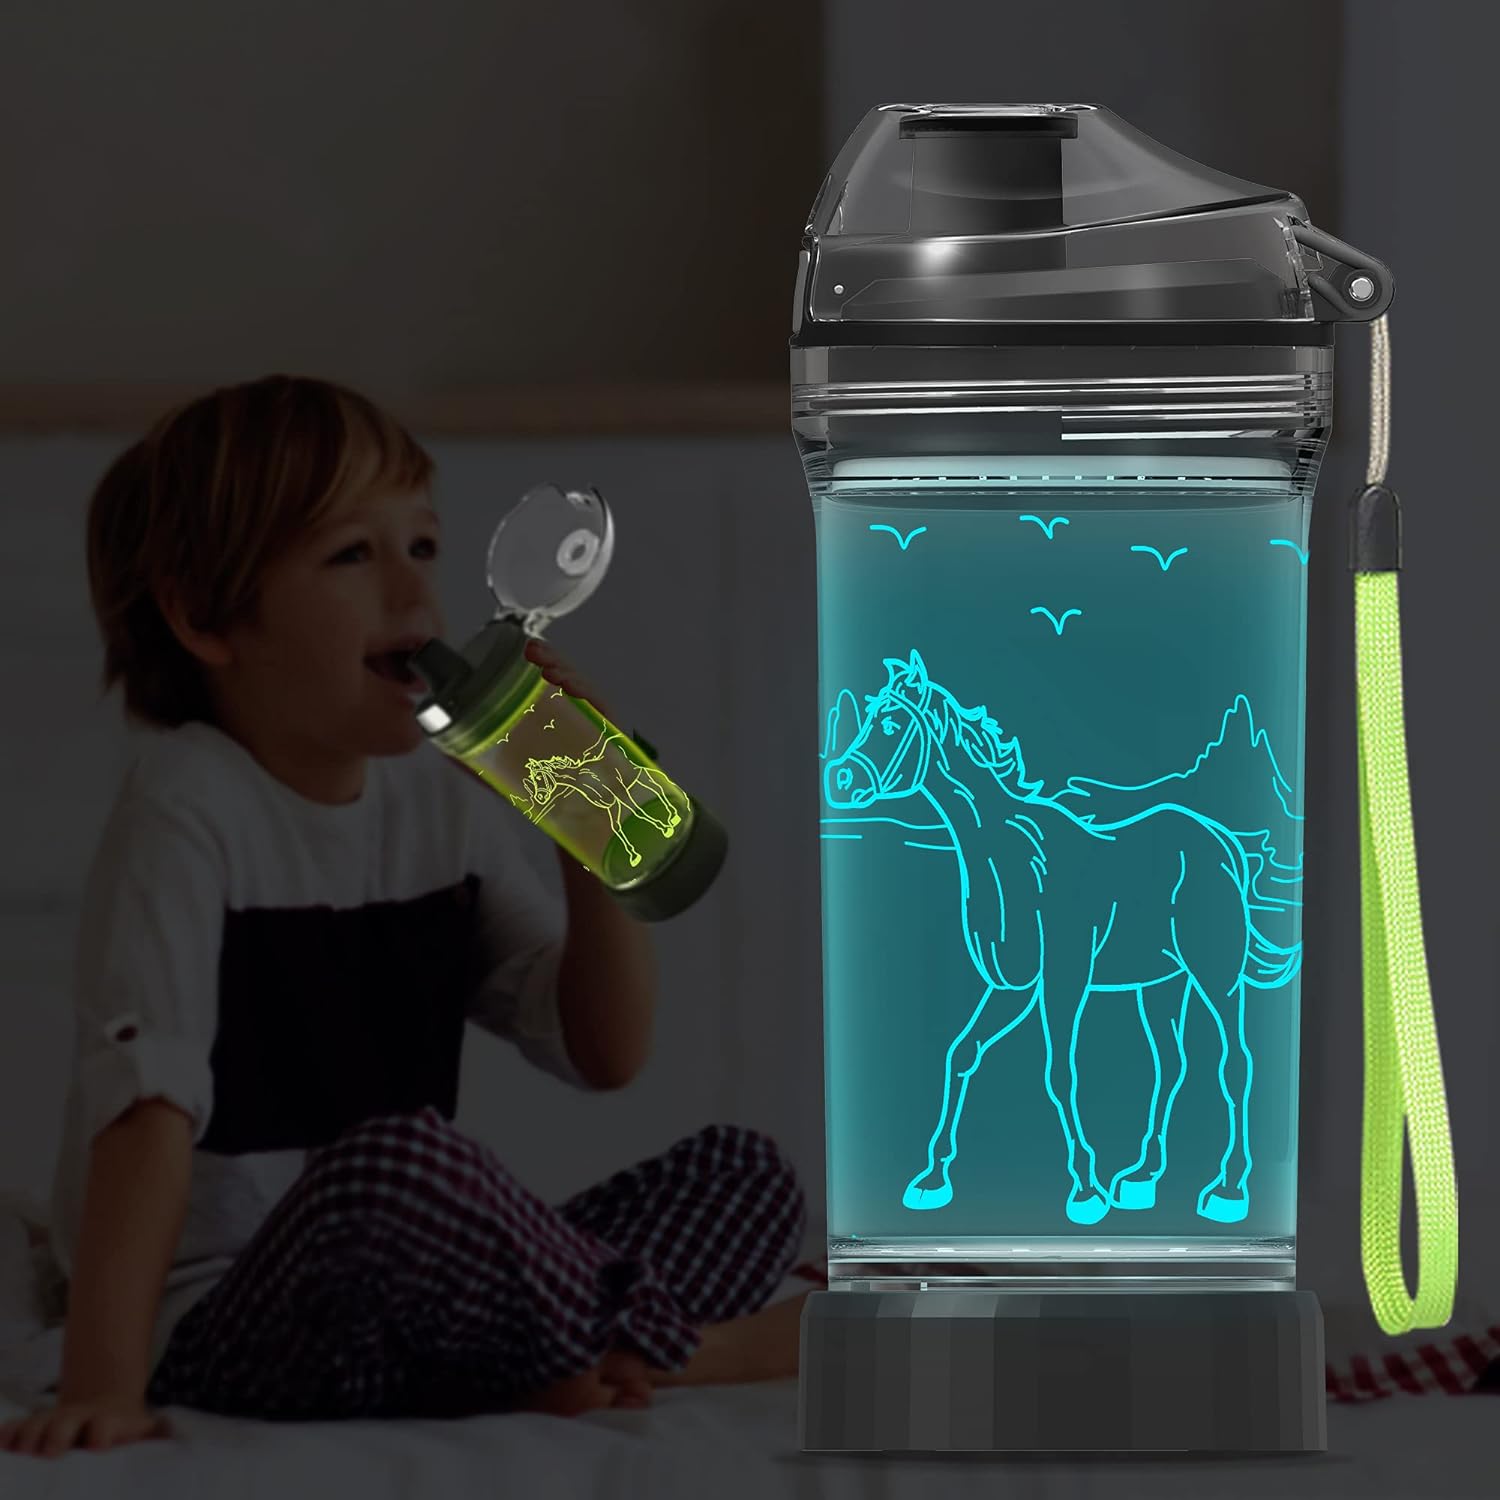 YuanDian Light Up Kids Water Bottle with 3D Horse Design- 14 OZ Tritan BPA Free Eco-Friendly - Cool Drinking Cups Gift for School Kids Boy Girl Child Christmas Holiday